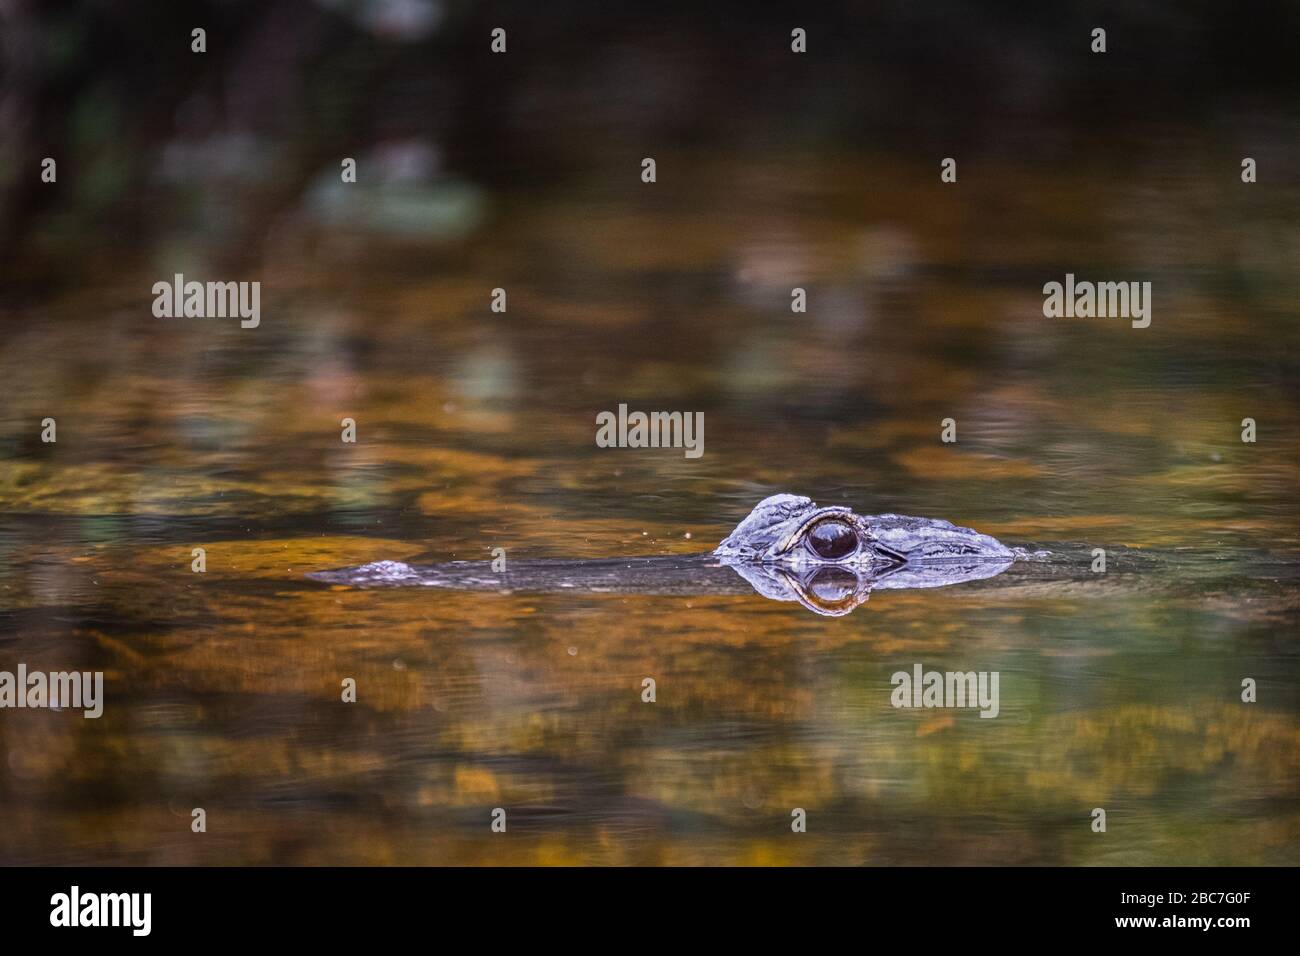 A small gator is seen on the surface of a small pool of water. Stock Photo